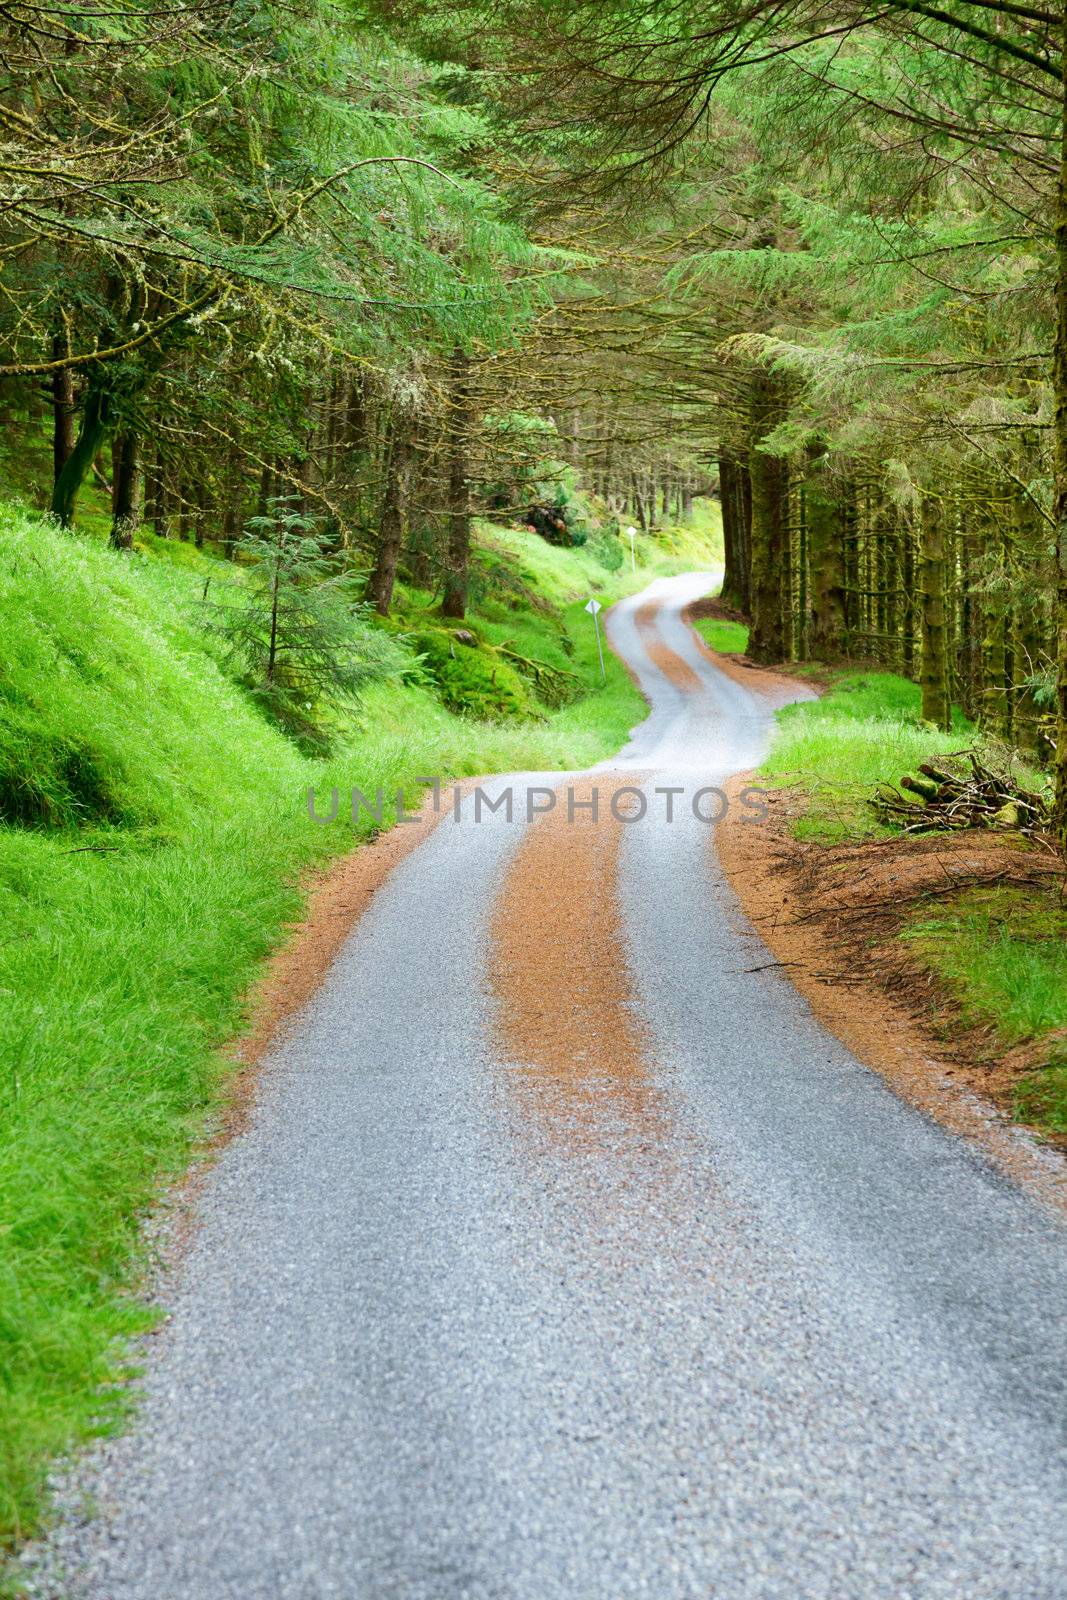 Scenic winding road through green forest in Scotland